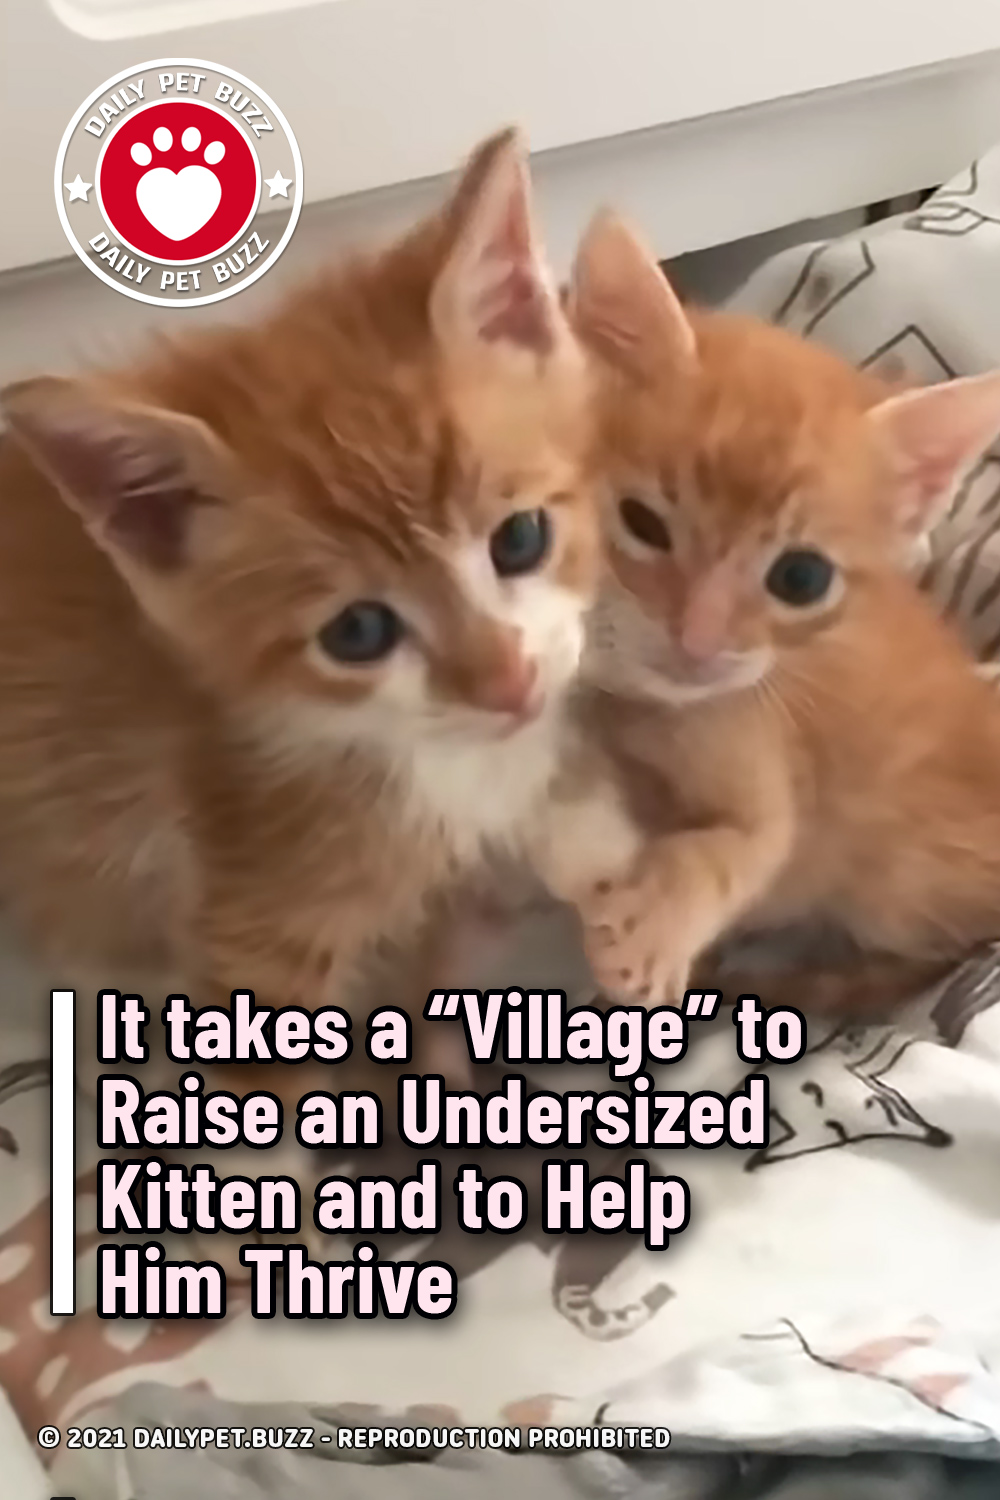 It takes a “Village” to Raise an Undersized Kitten and to Help Him Thrive